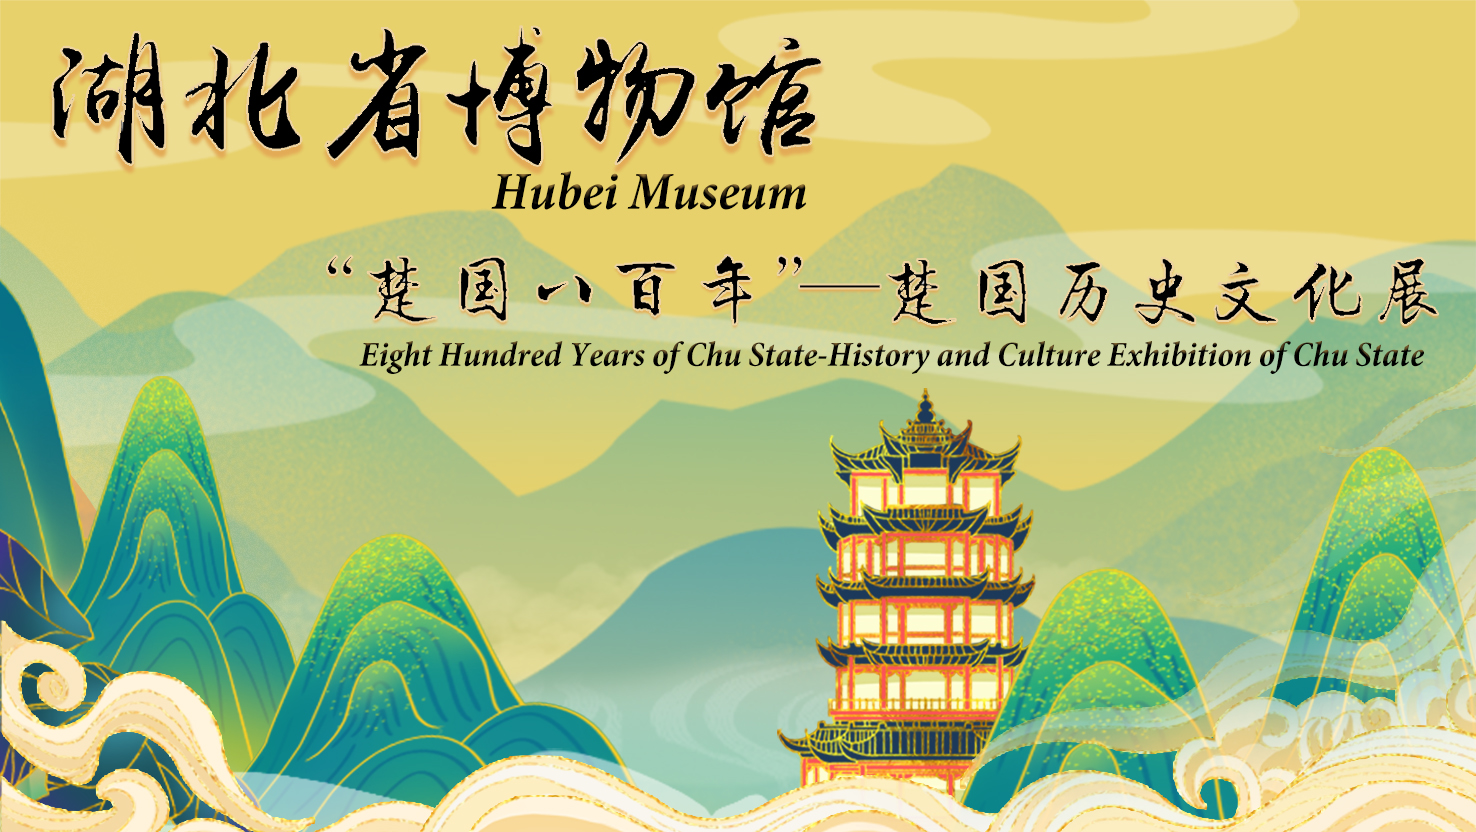 Hubei Museum——Eight Hundred Years of Chu State-History and Culture Exhibition of Chu State